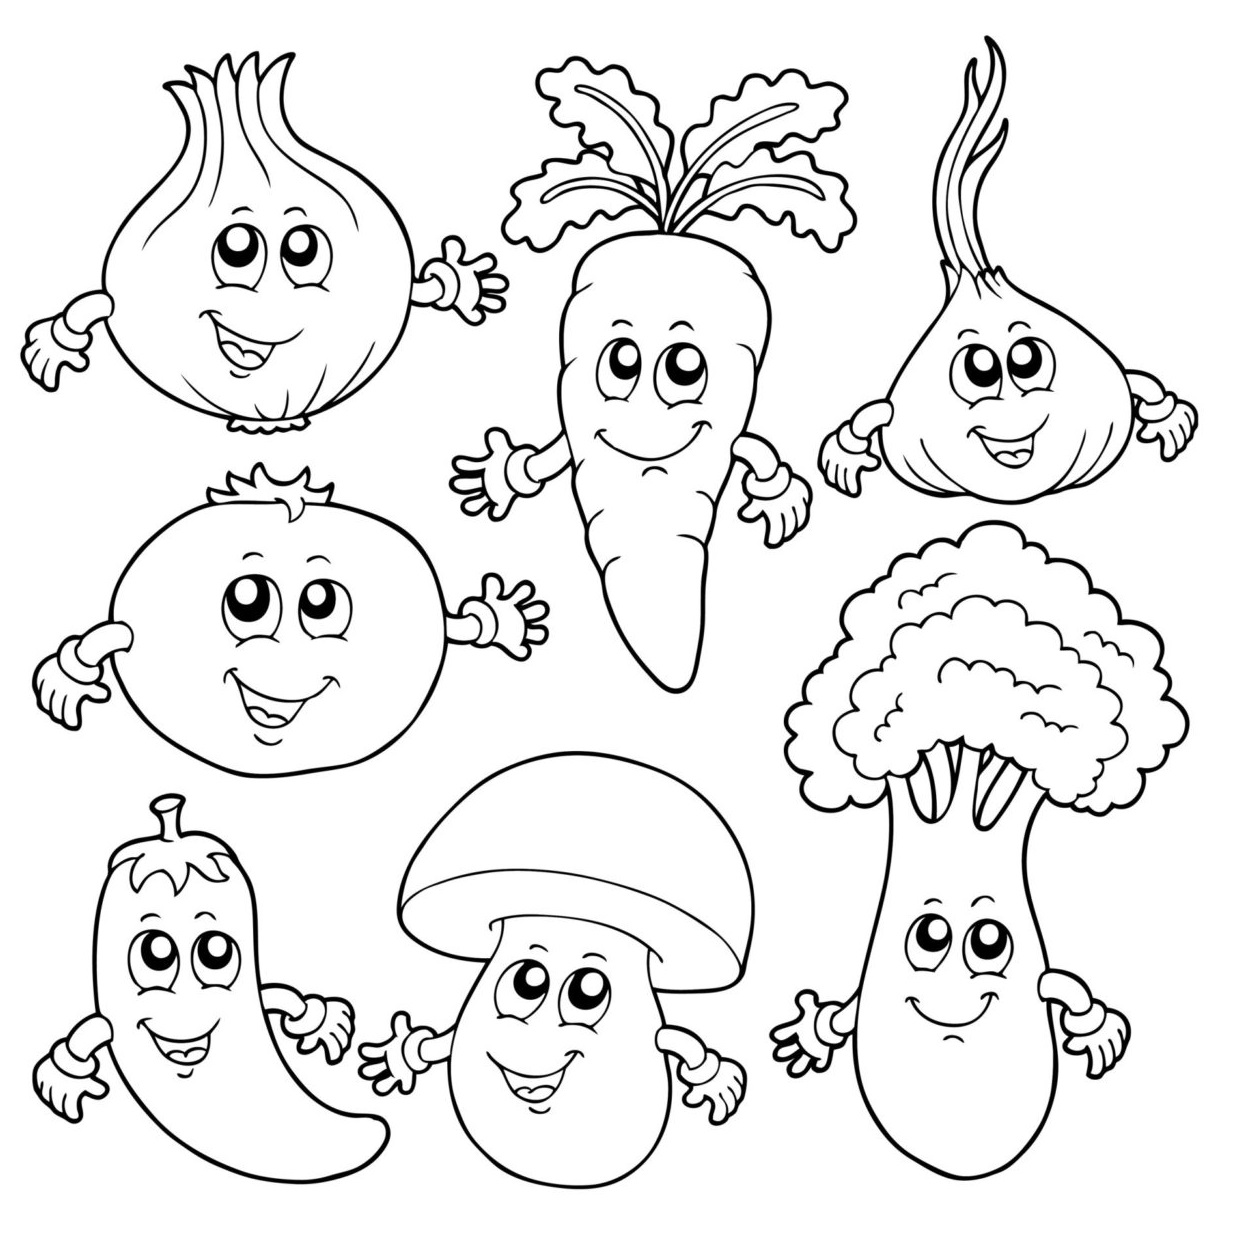 Cute Food Friends For Kids Coloring Page